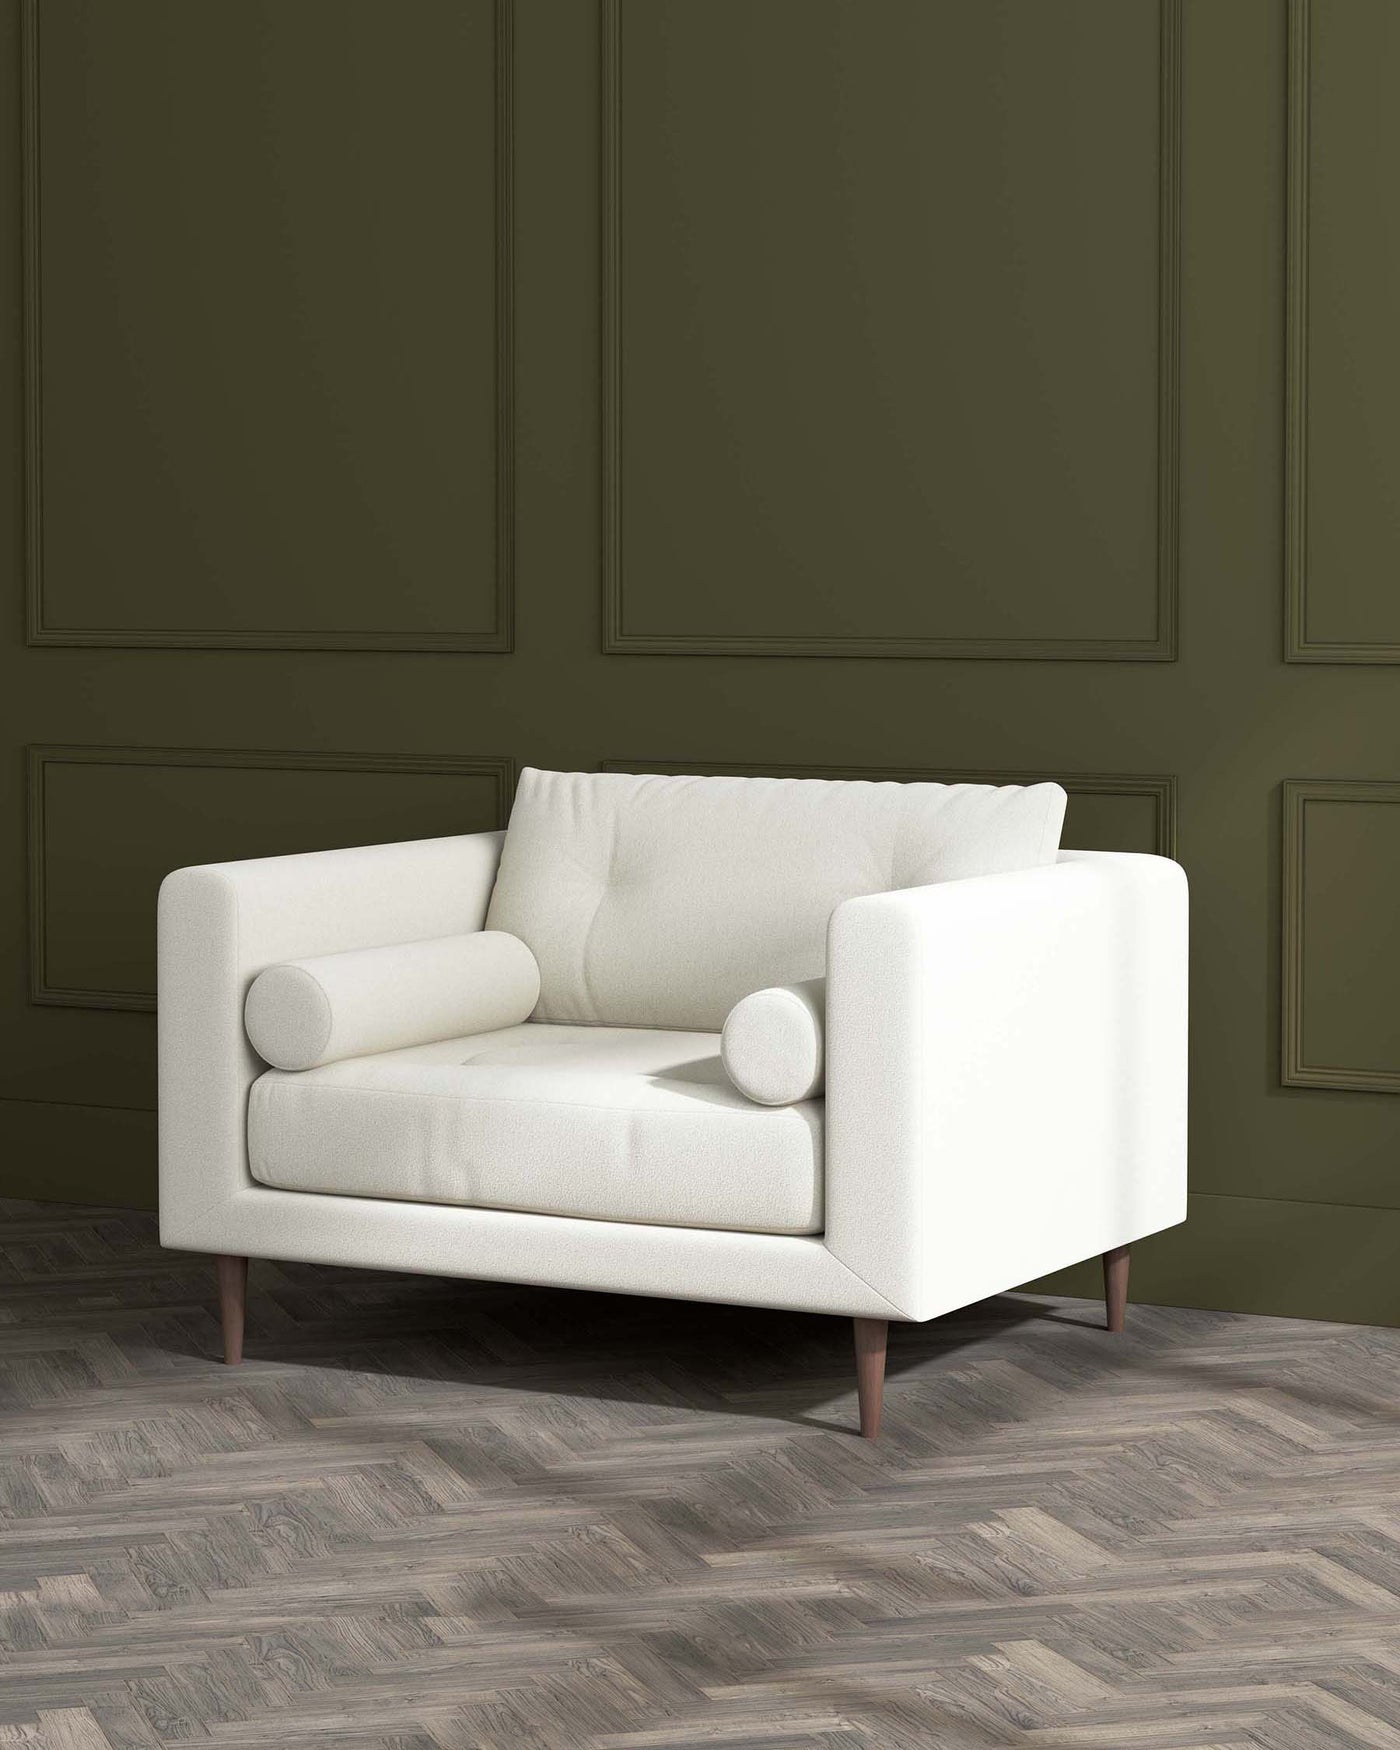 Modern off-white two-seater sofa with a minimalist design, featuring clean lines, cushioned back and seat, rounded armrests, and dark wooden tapered legs, set against a dark green panelled wall and herringbone parquet flooring.